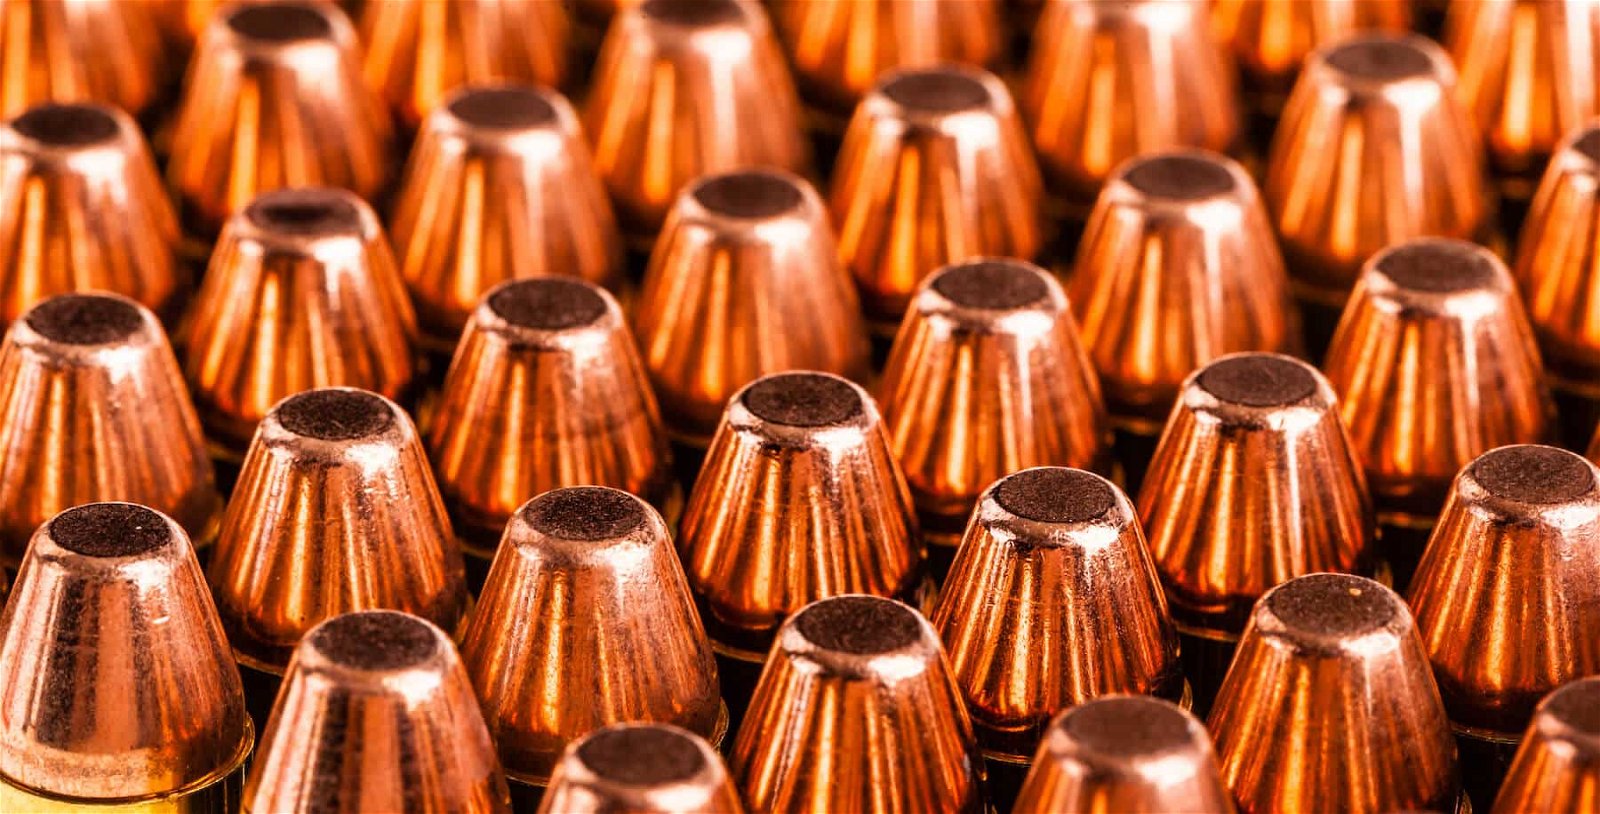 Best 45 ACP Ammo for Law Enforcement Officers - Chosen by Experts